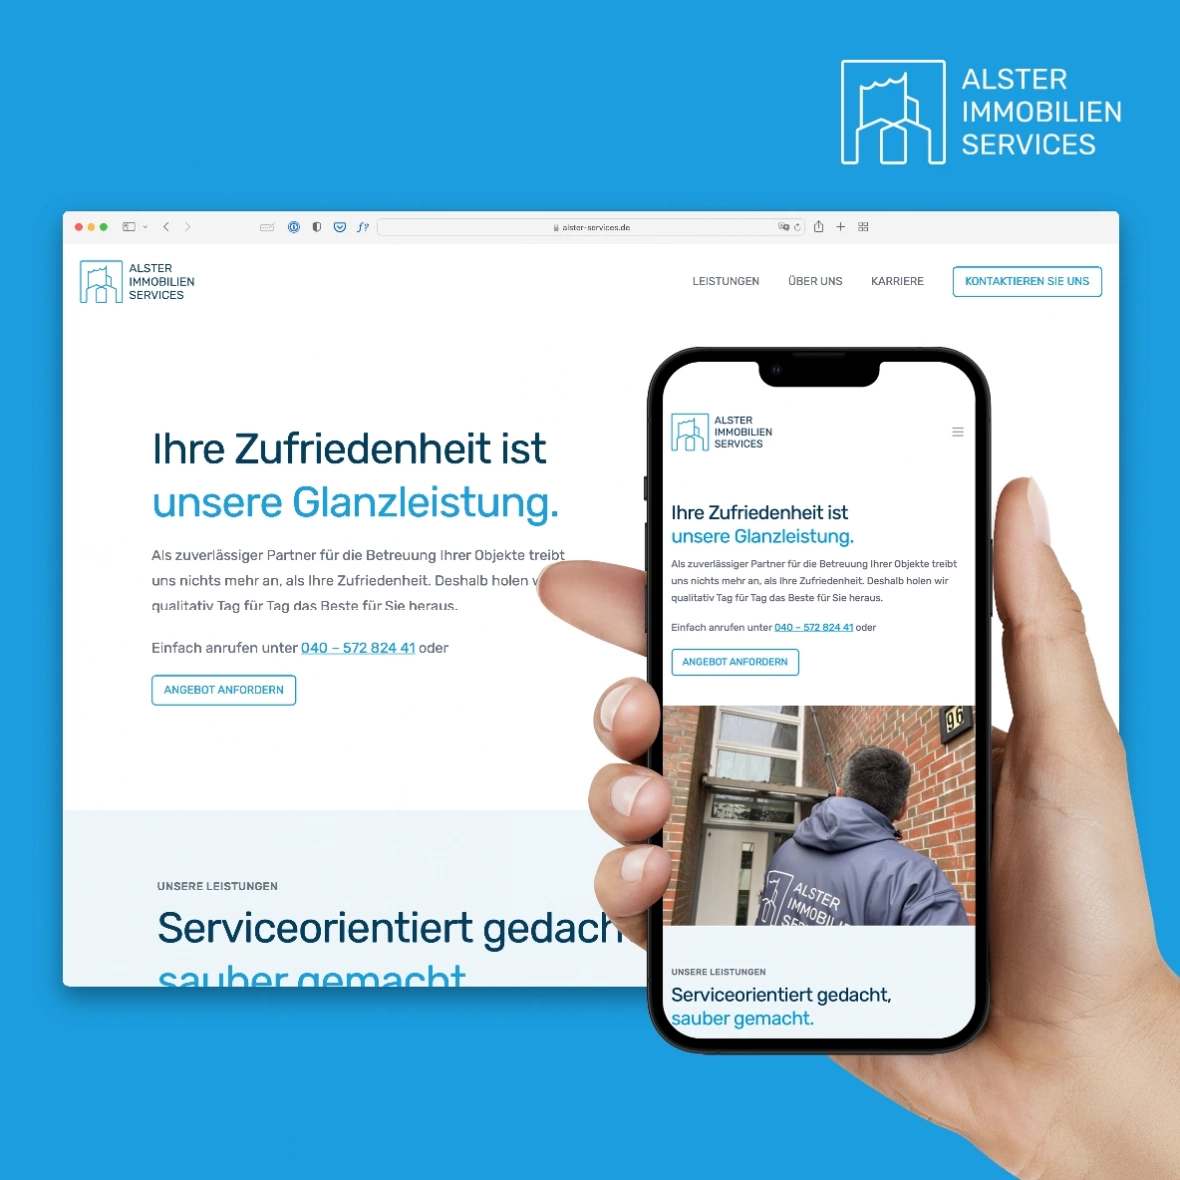 Alster Immobilienservices